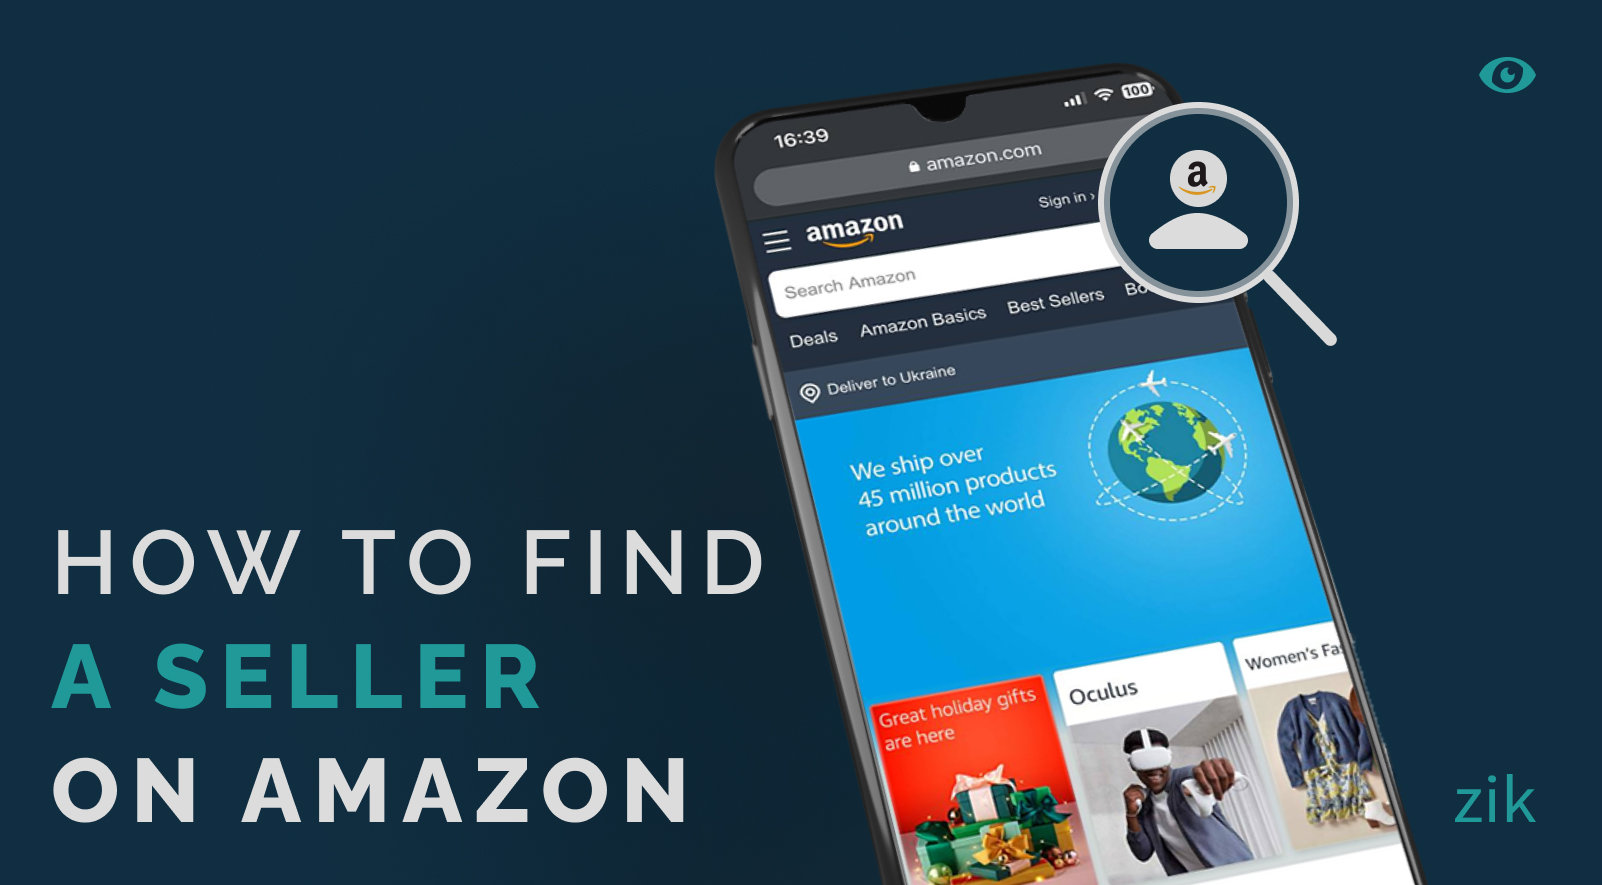 How to find a seller on Amazon